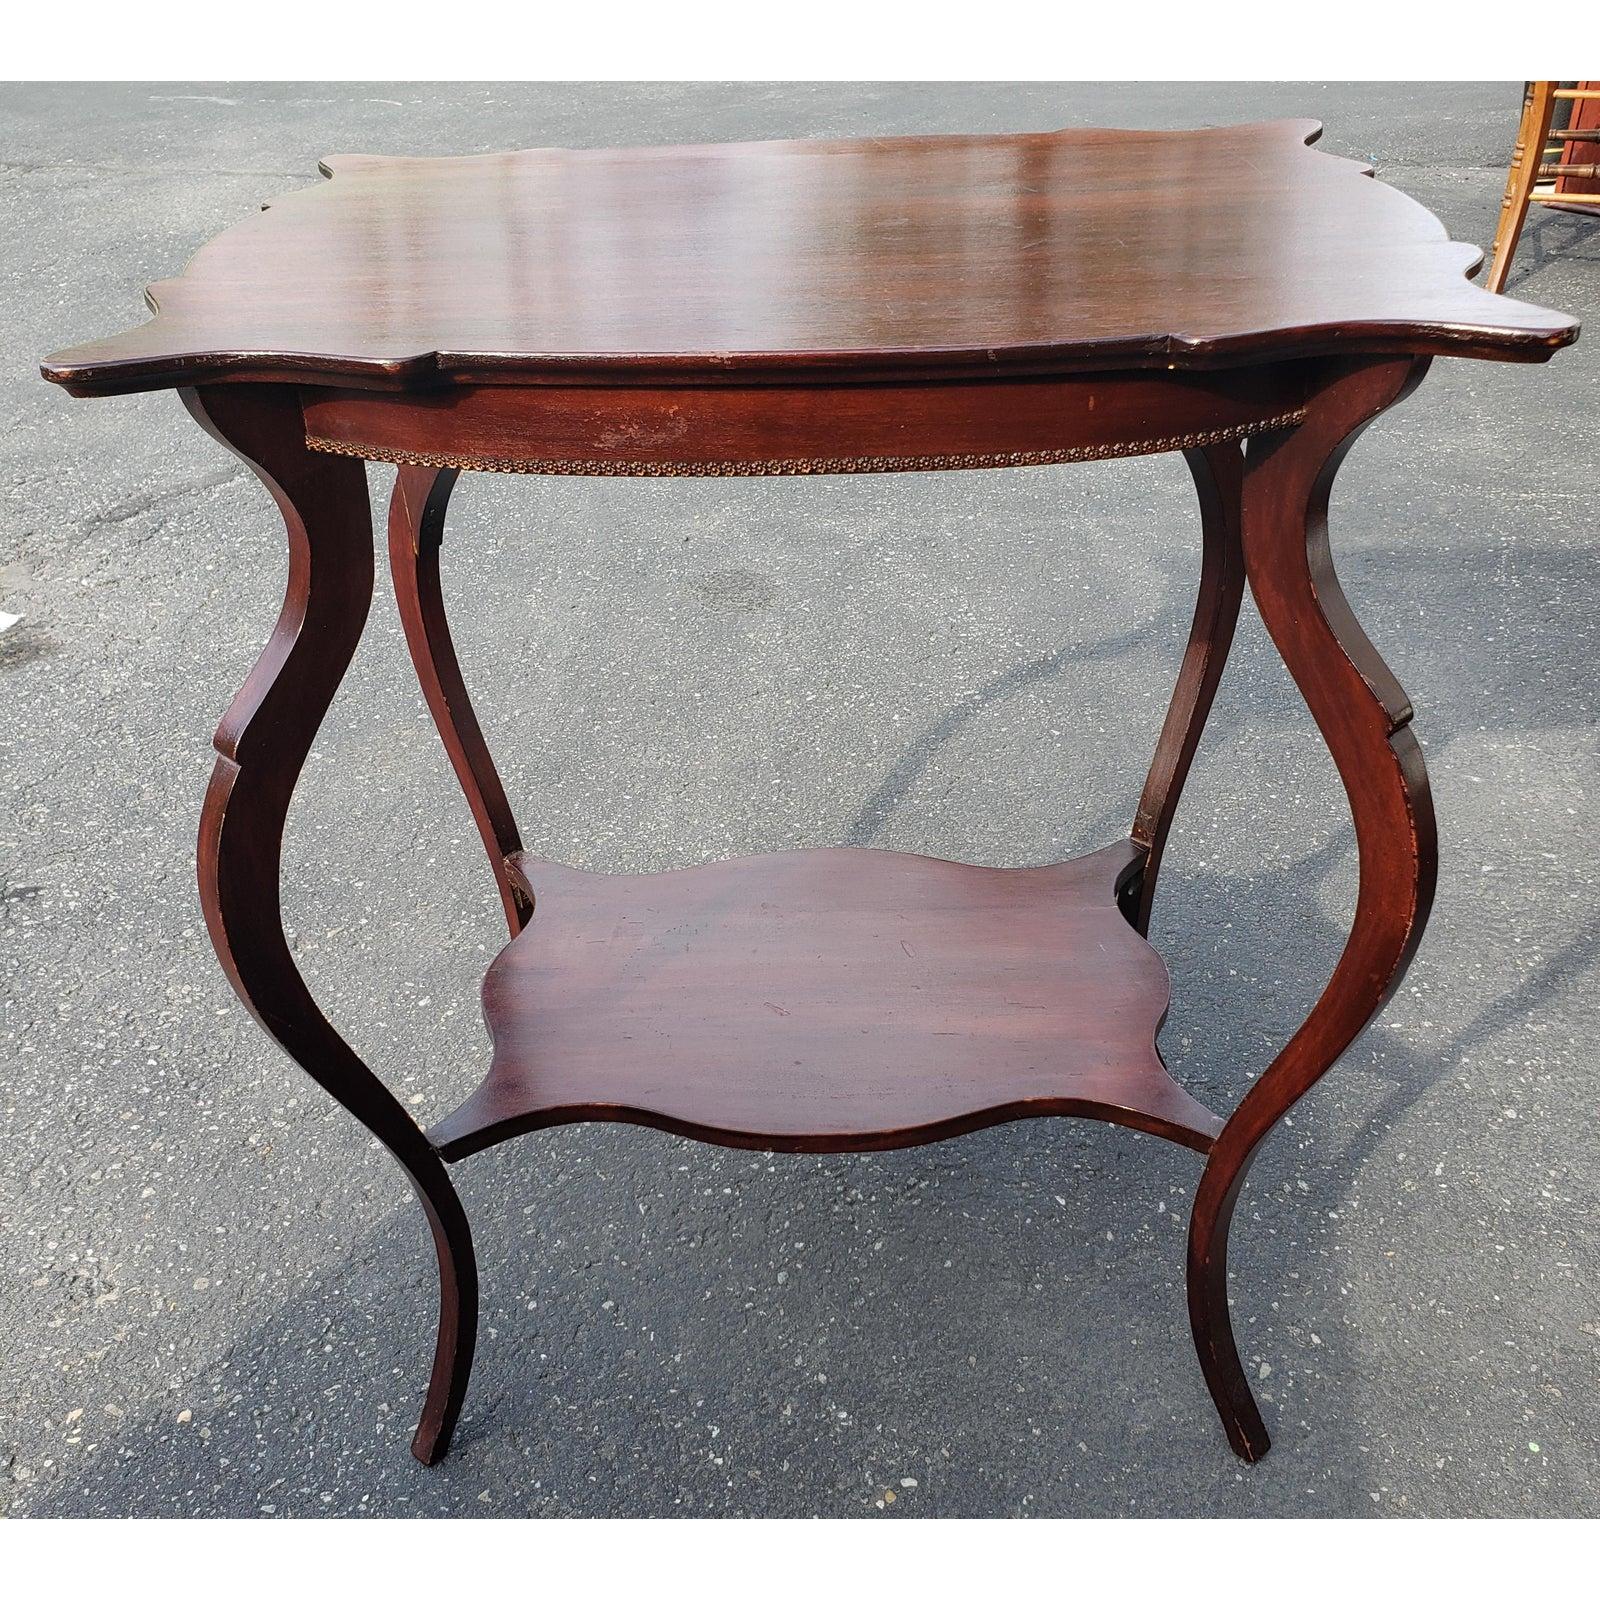 1800s Georgian Solid Mahogany Accent Table In Good Condition For Sale In Germantown, MD